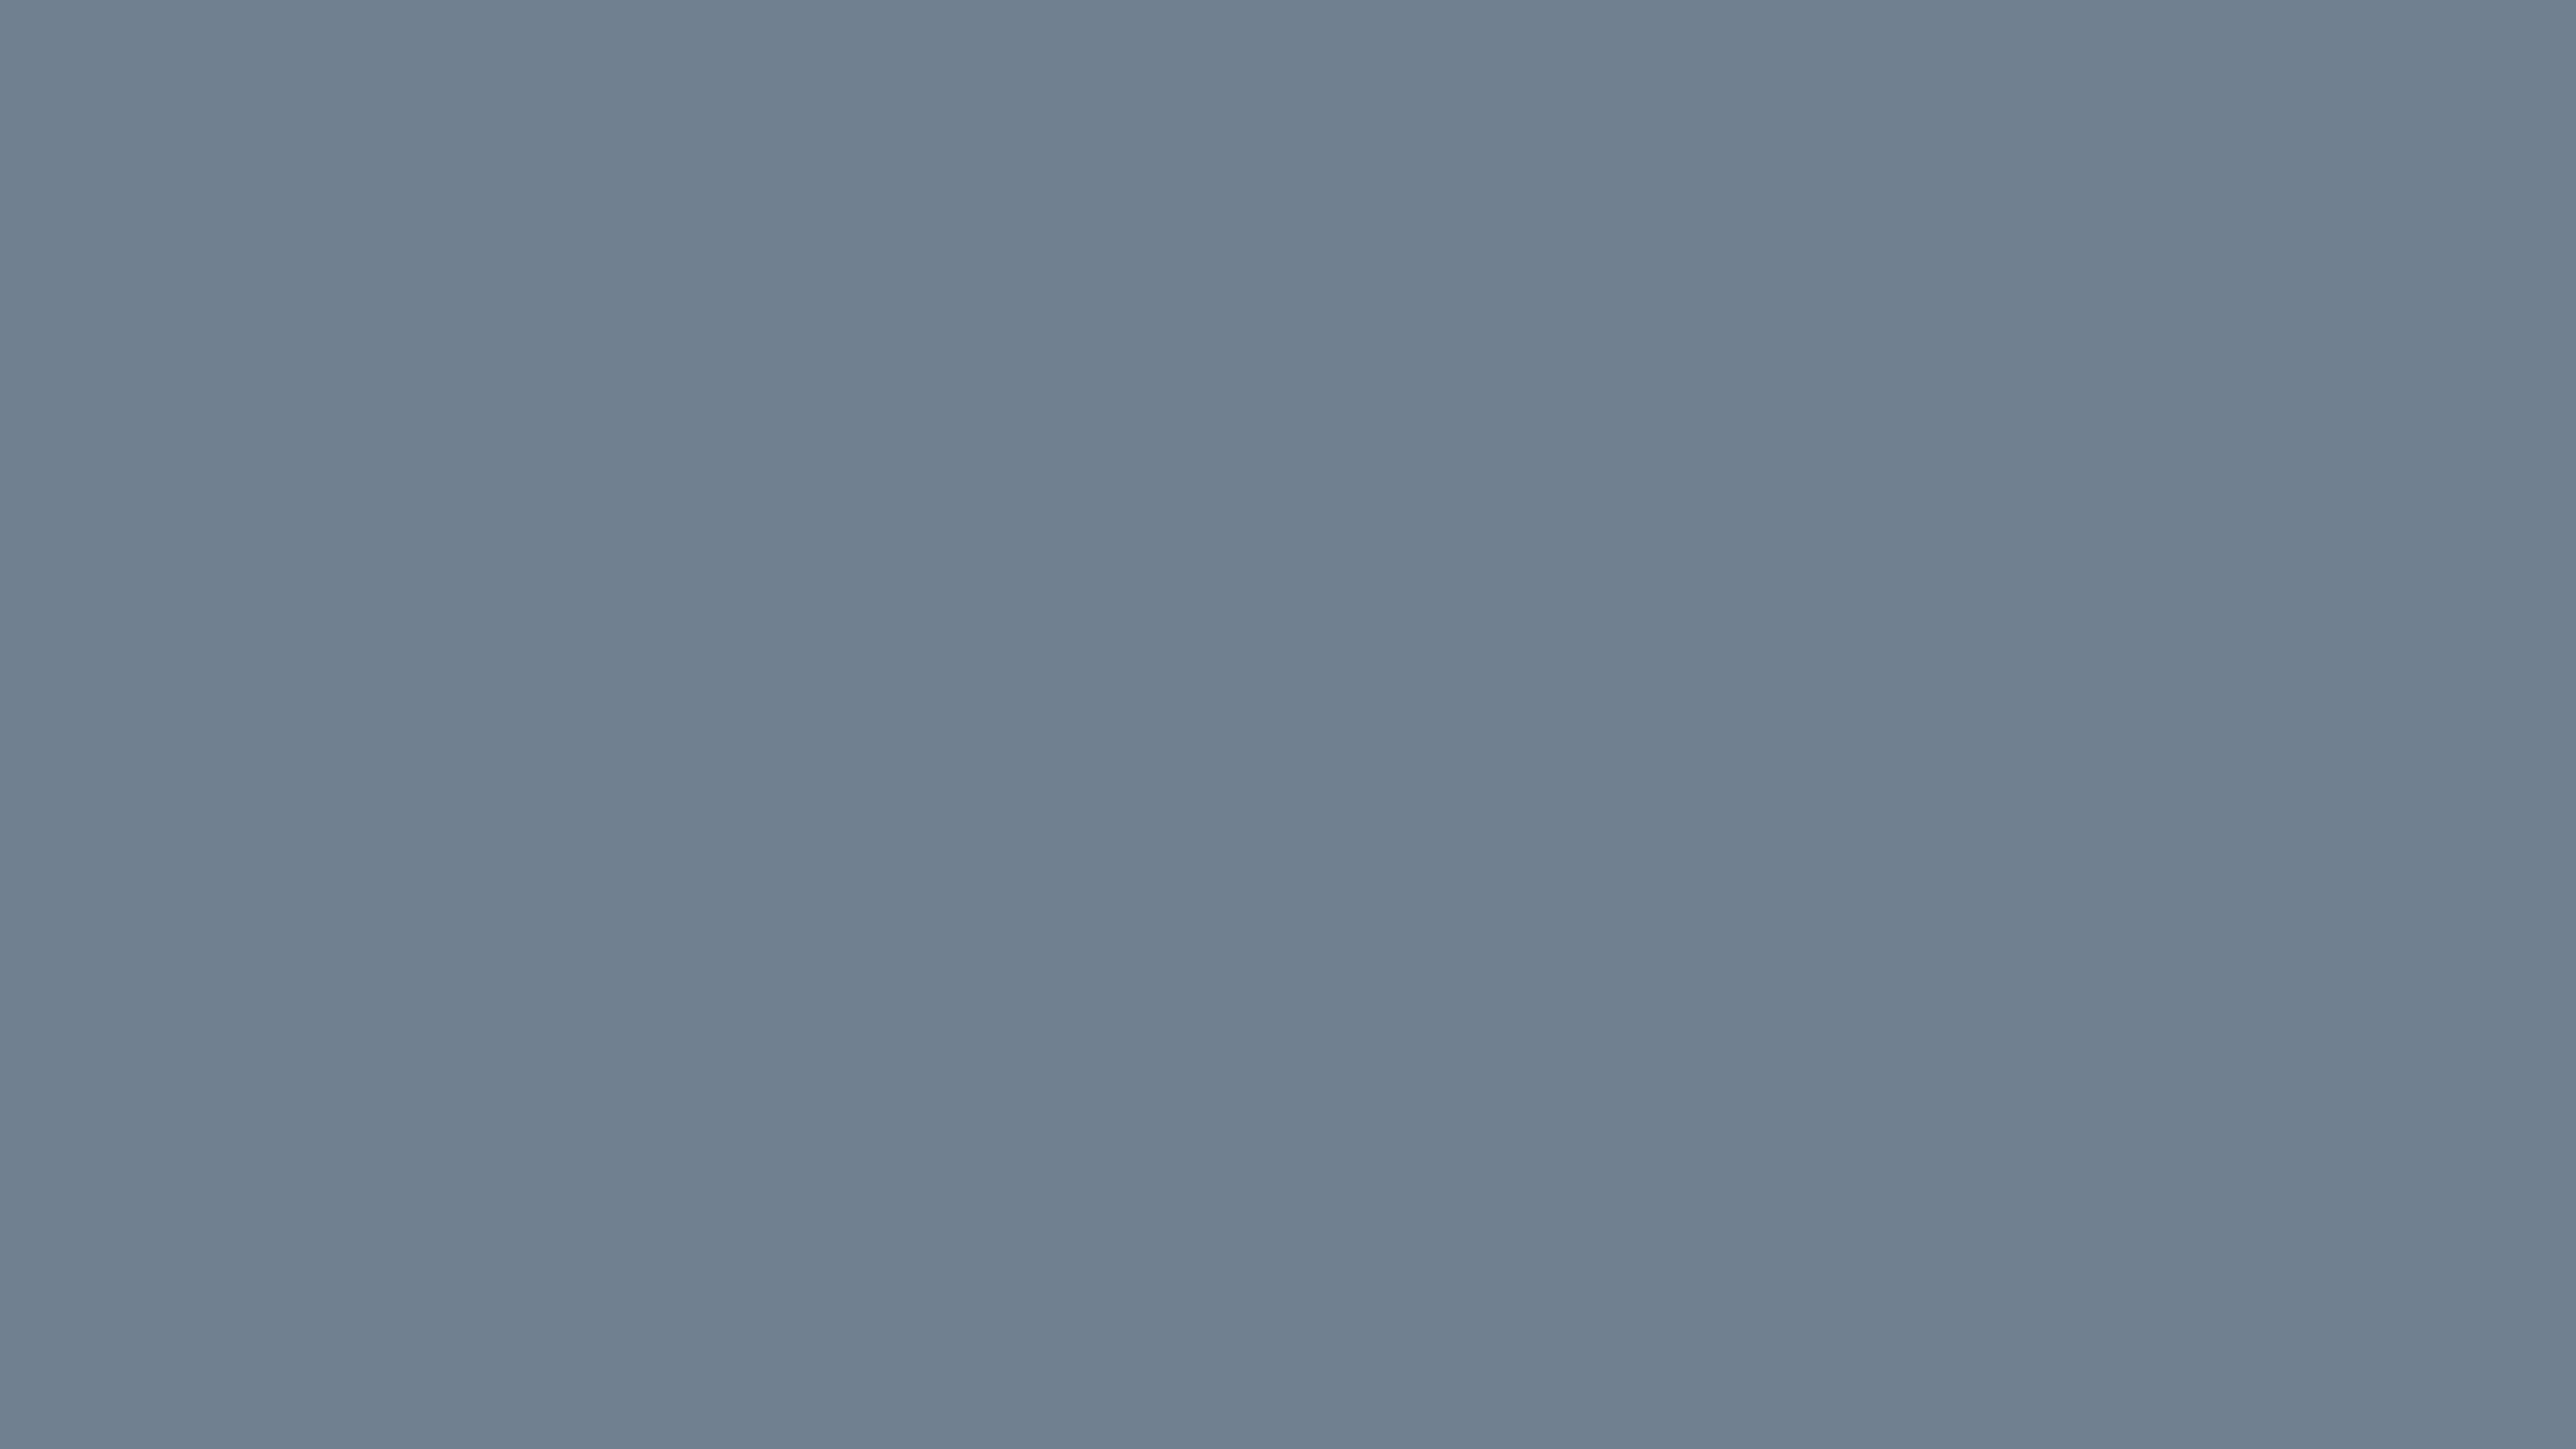 7680x4320 Slate Gray Solid Color Background